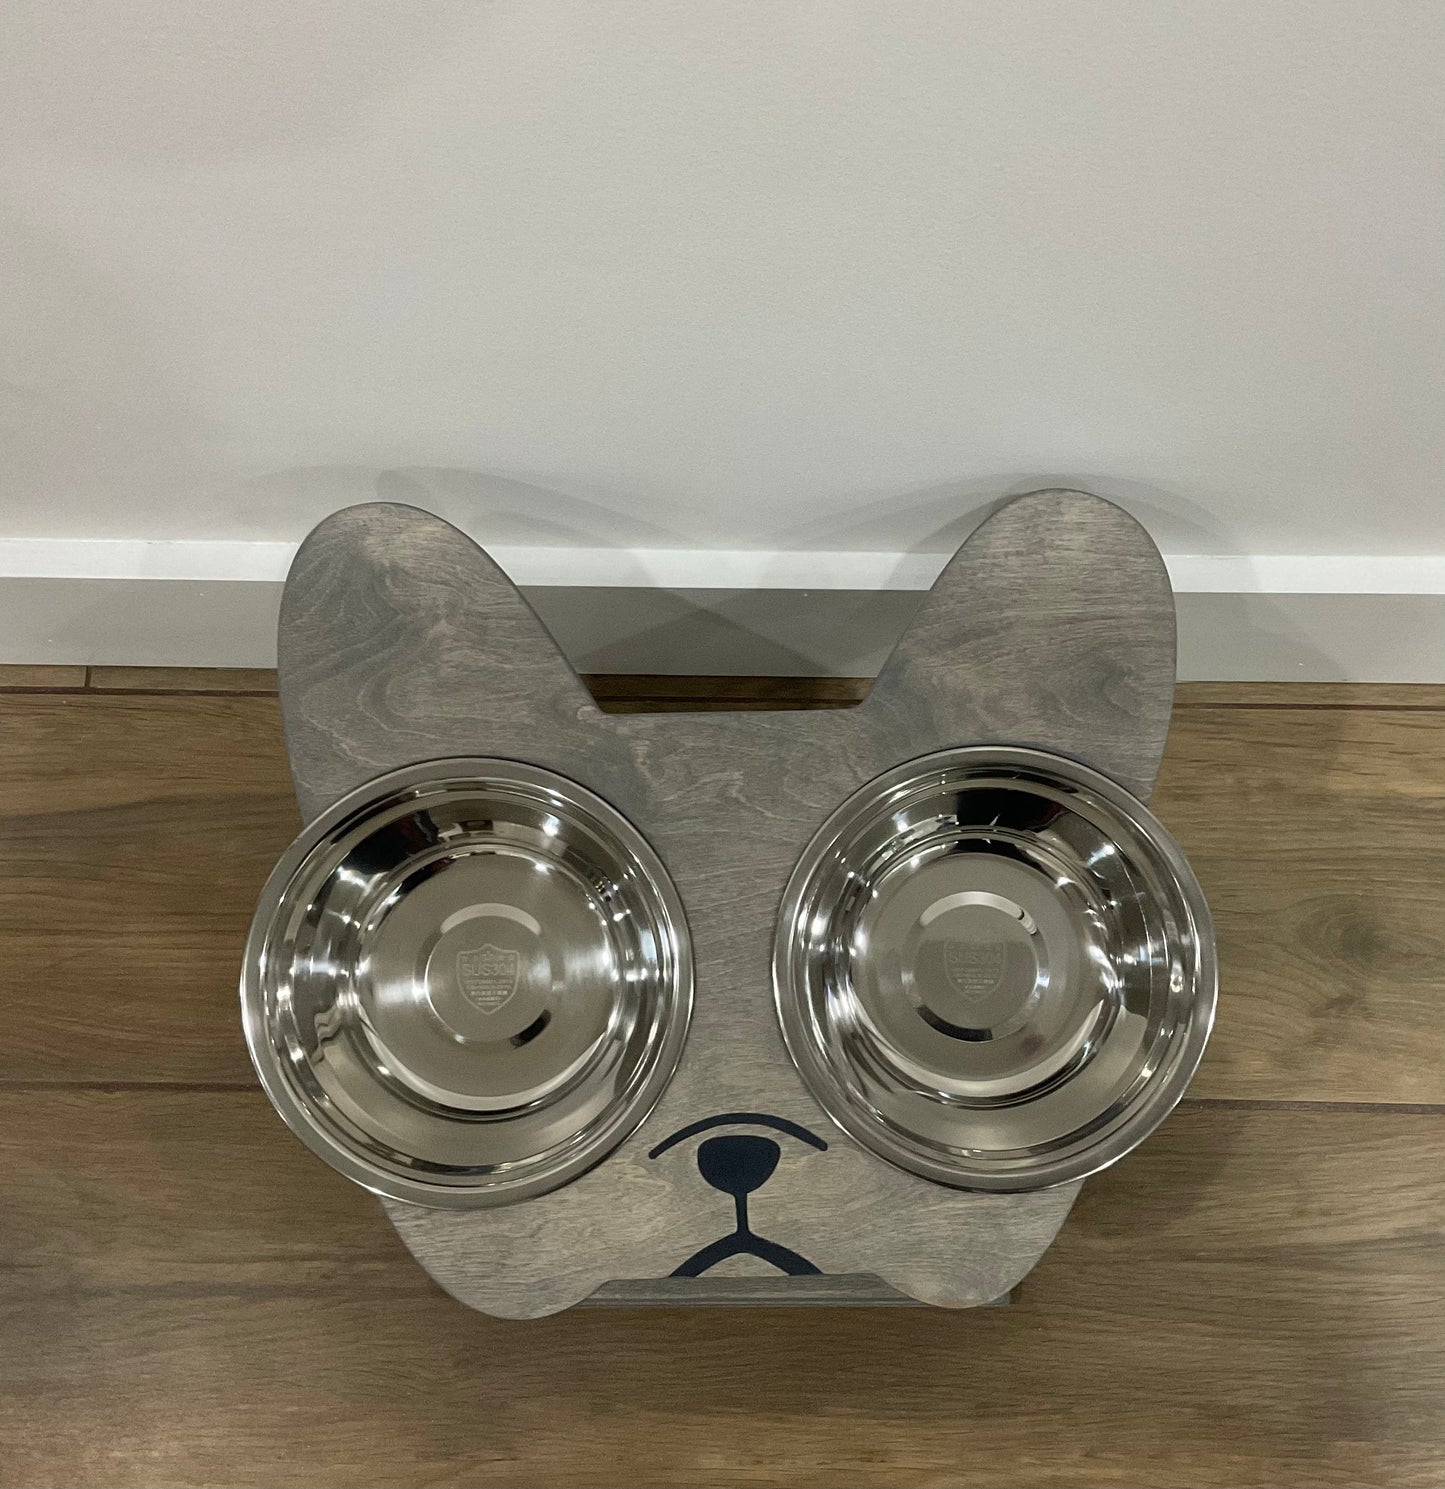 Dog Bowl stand, Elevated Dog bowl, Dog Stand-up eating and drinking, French Bulldog & Pug stand, small dog stand, dog face